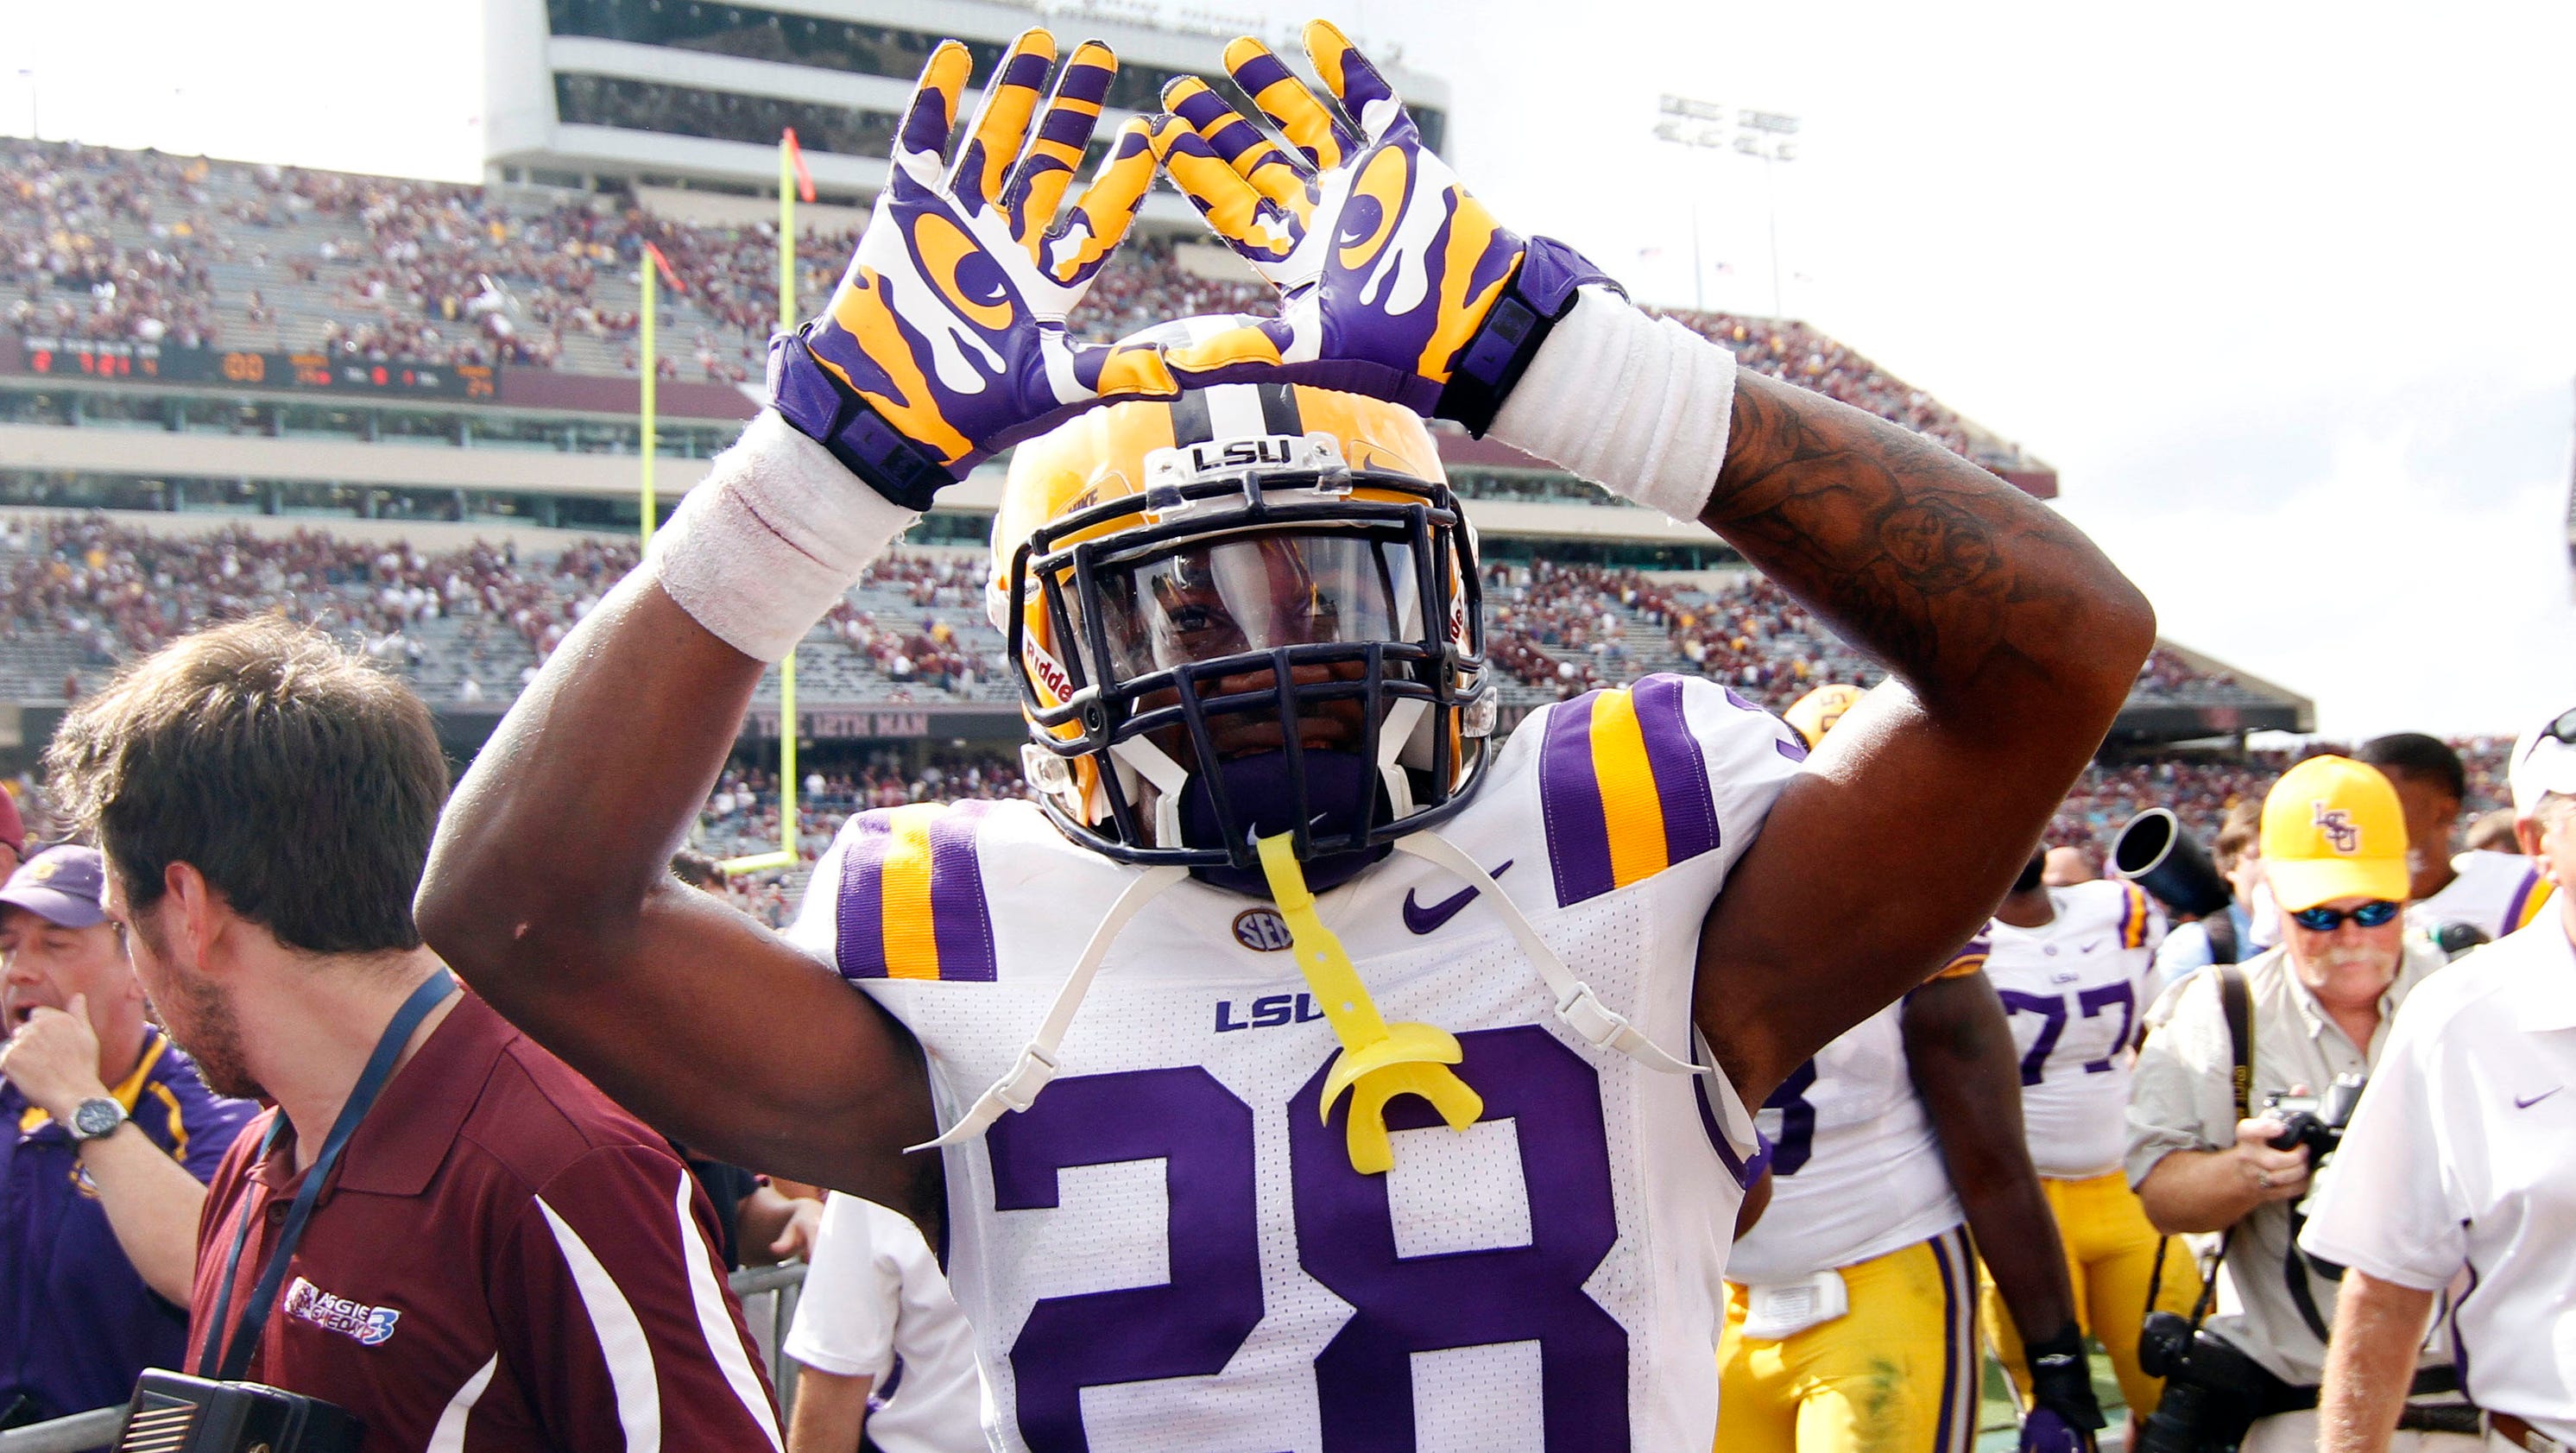 Suspended LSU player reinstated after charges reduced to misdemeanor